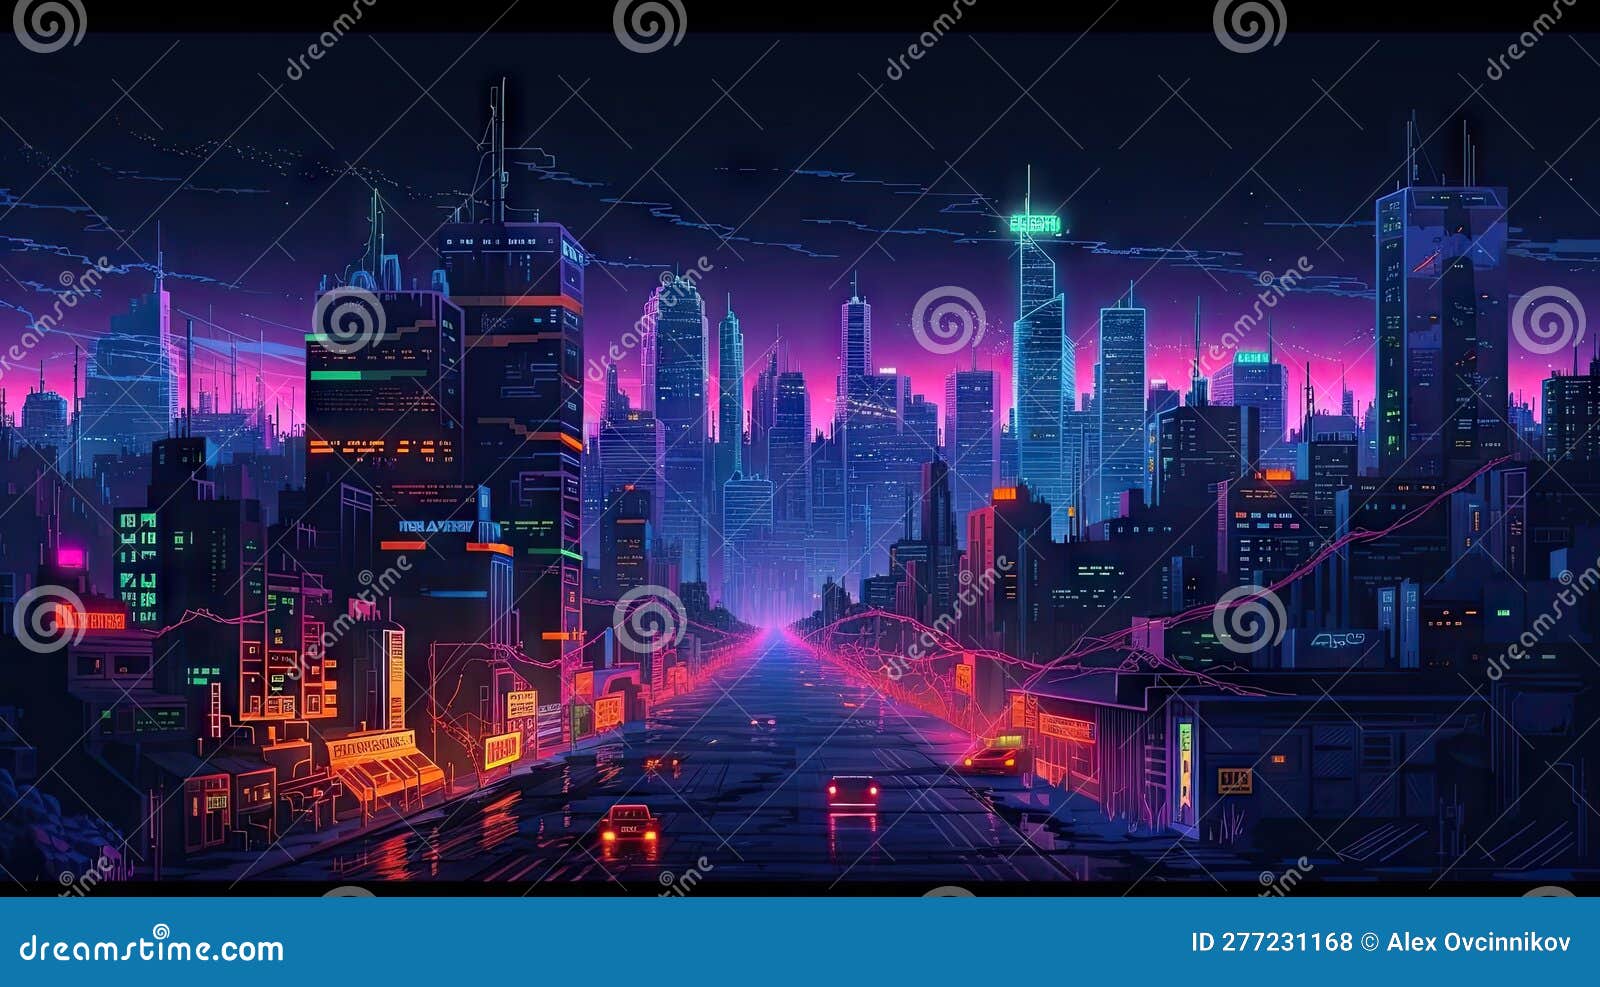 Nighttime Cyberpunk Cityscape with Skyscrapers, Neon Lights, and ...